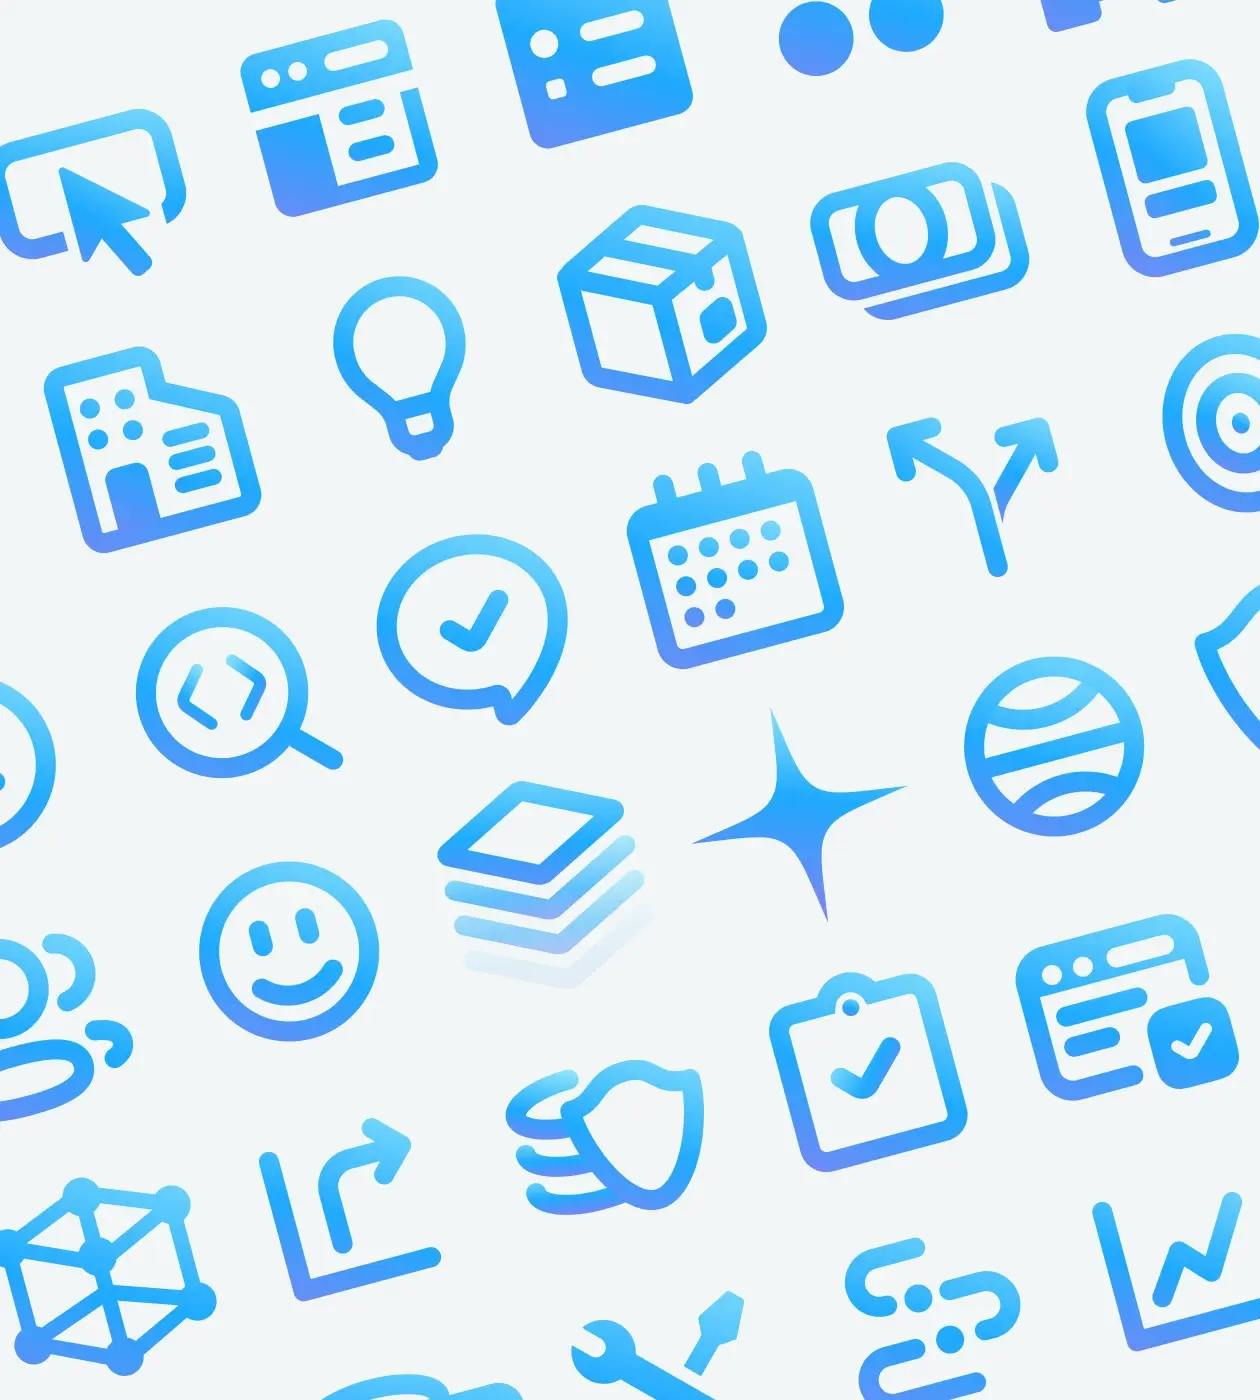 Custom icons for apps